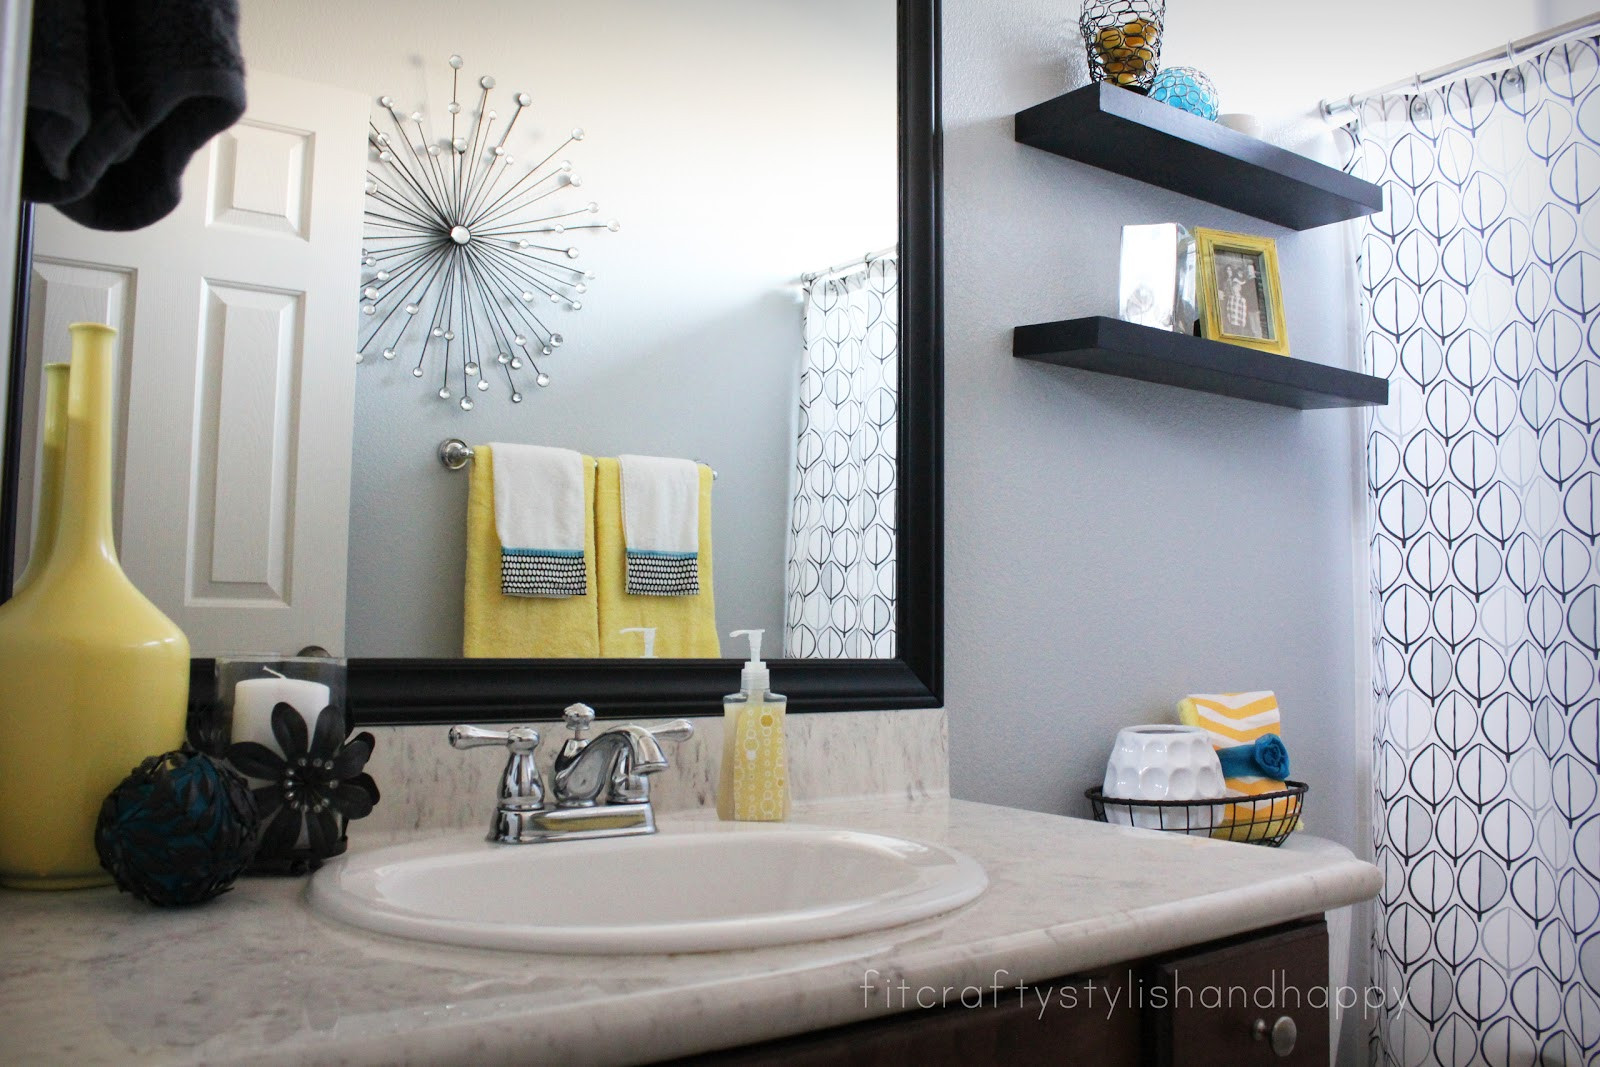 Teal Bathroom Decor
 Fit Crafty Stylish and Happy Guest Bathroom Makeover